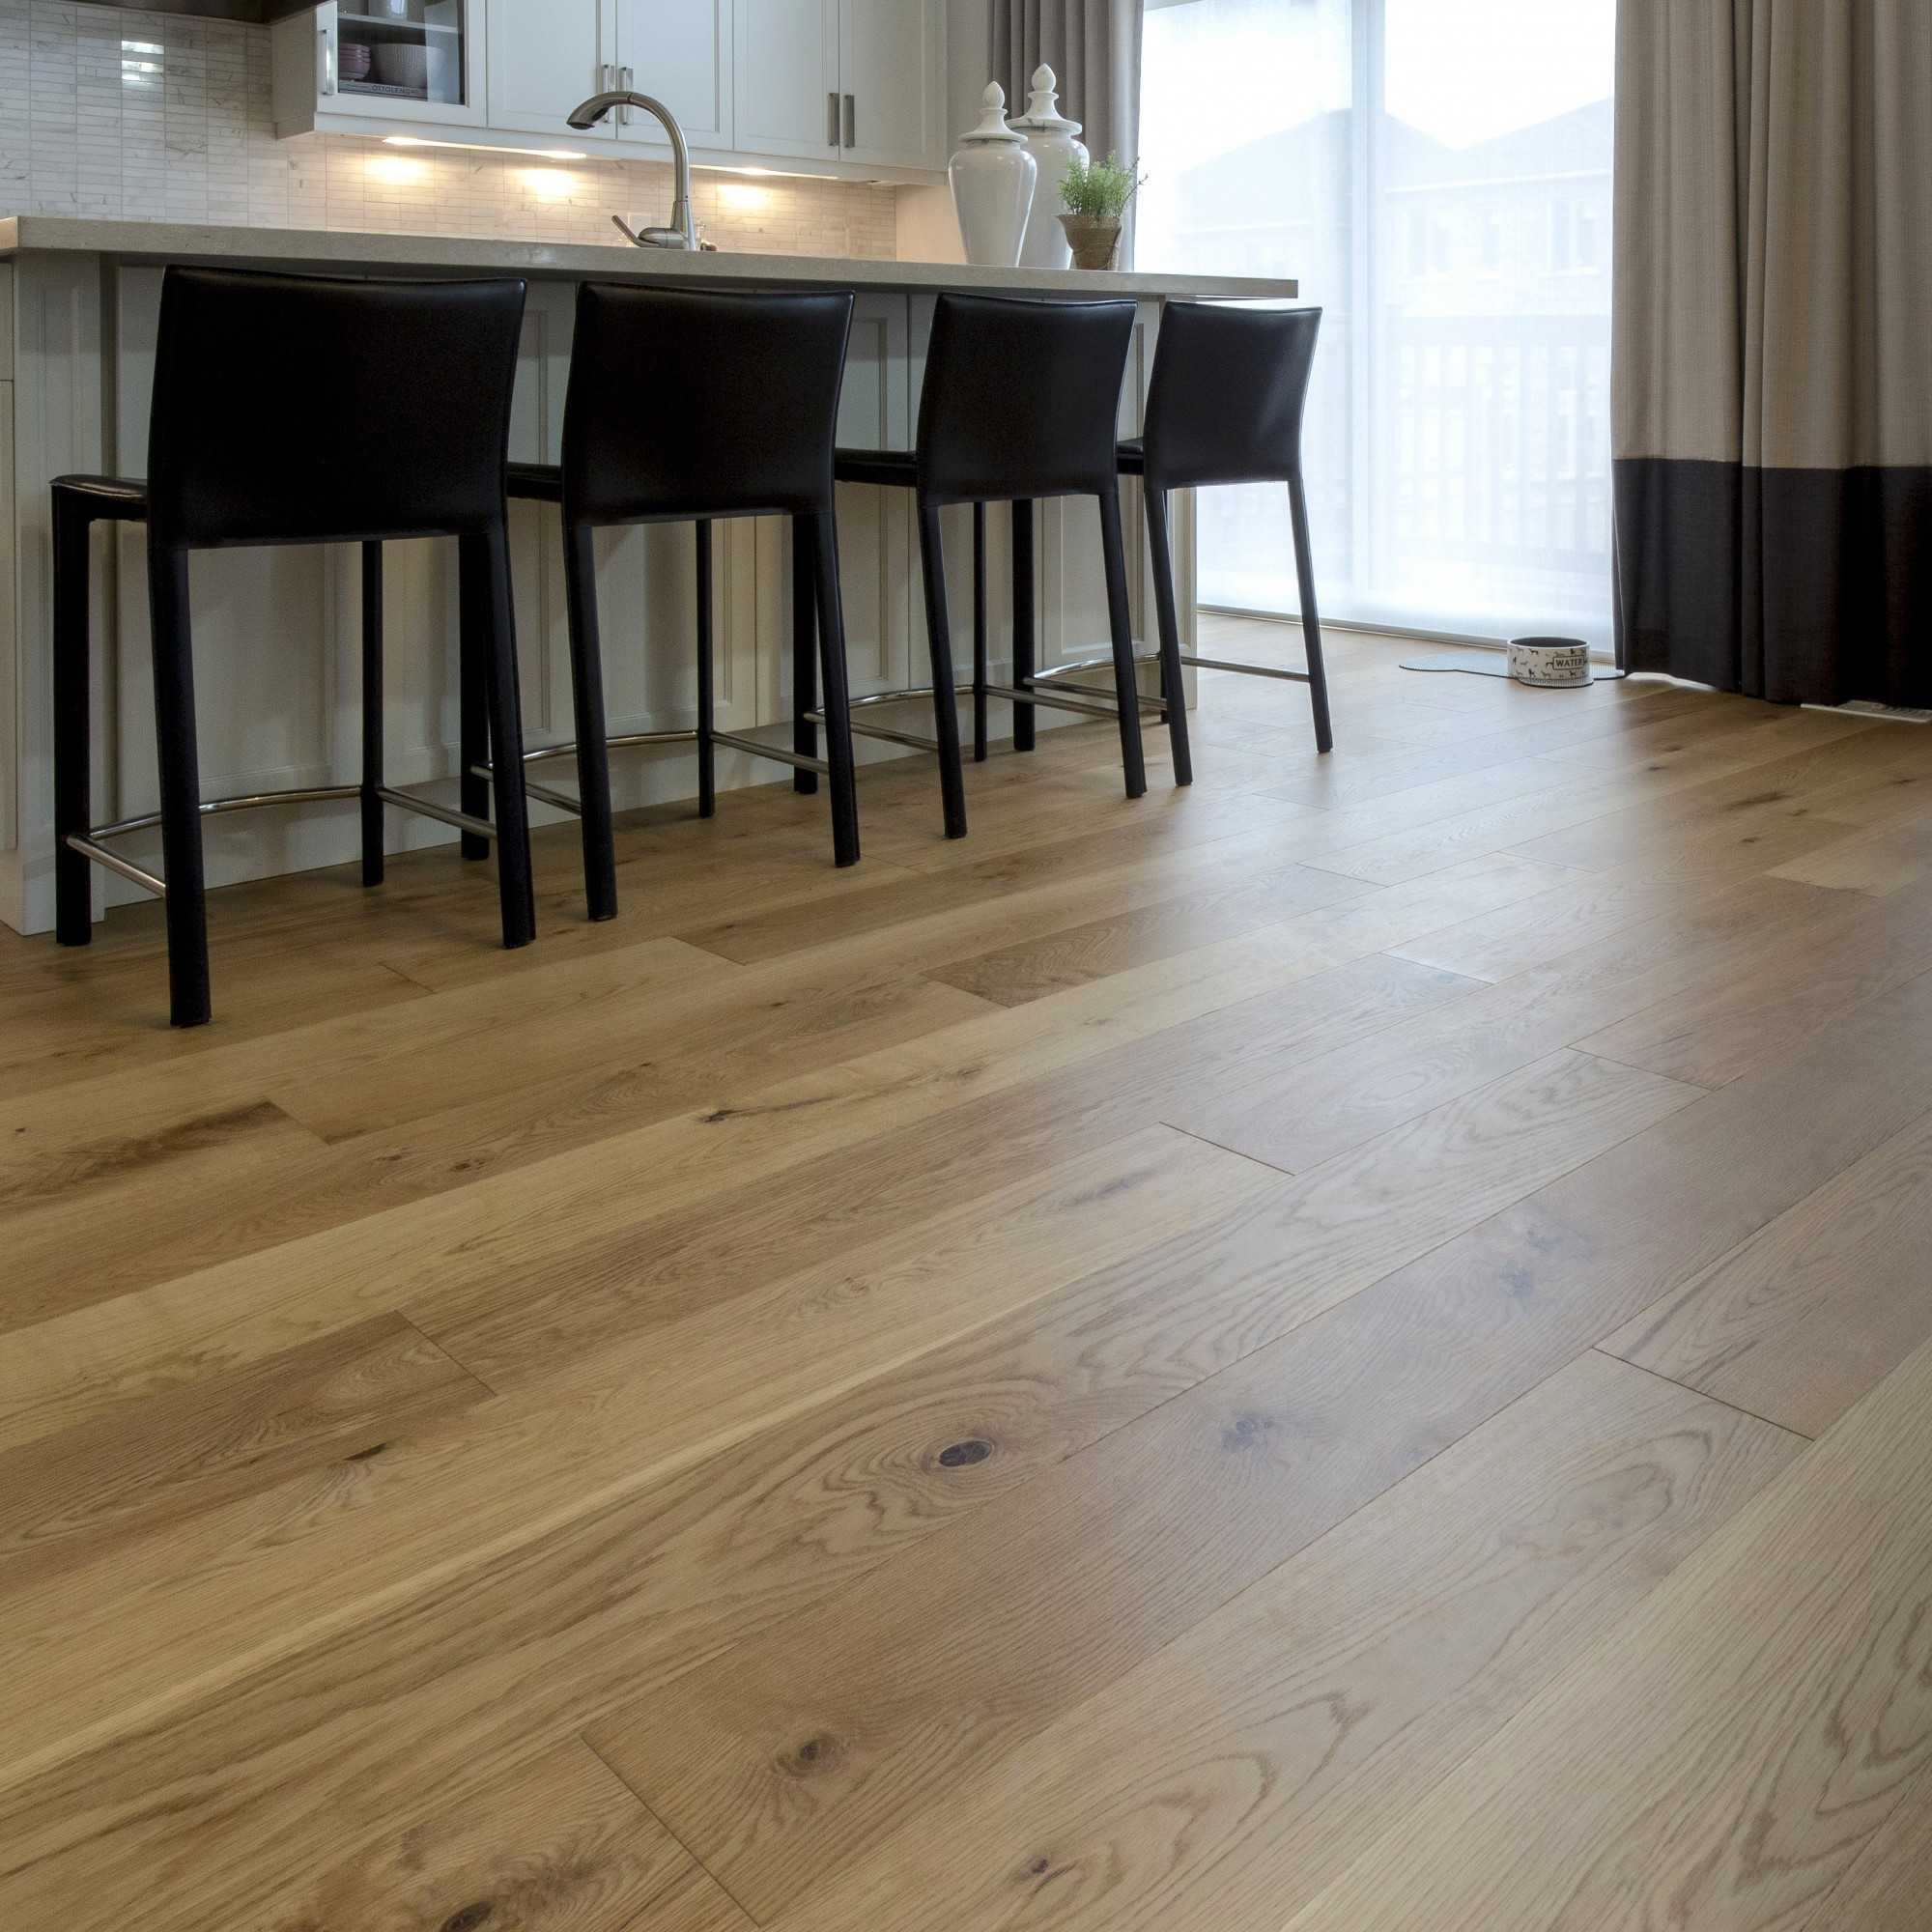 11 Awesome Hardwood Flooring Prices Calgary 2024 free download hardwood flooring prices calgary of breathtaking hardwood flooring pictures beautiful floors are here only pertaining to breathtaking hardwood flooring picture smooth white oak natural vinta